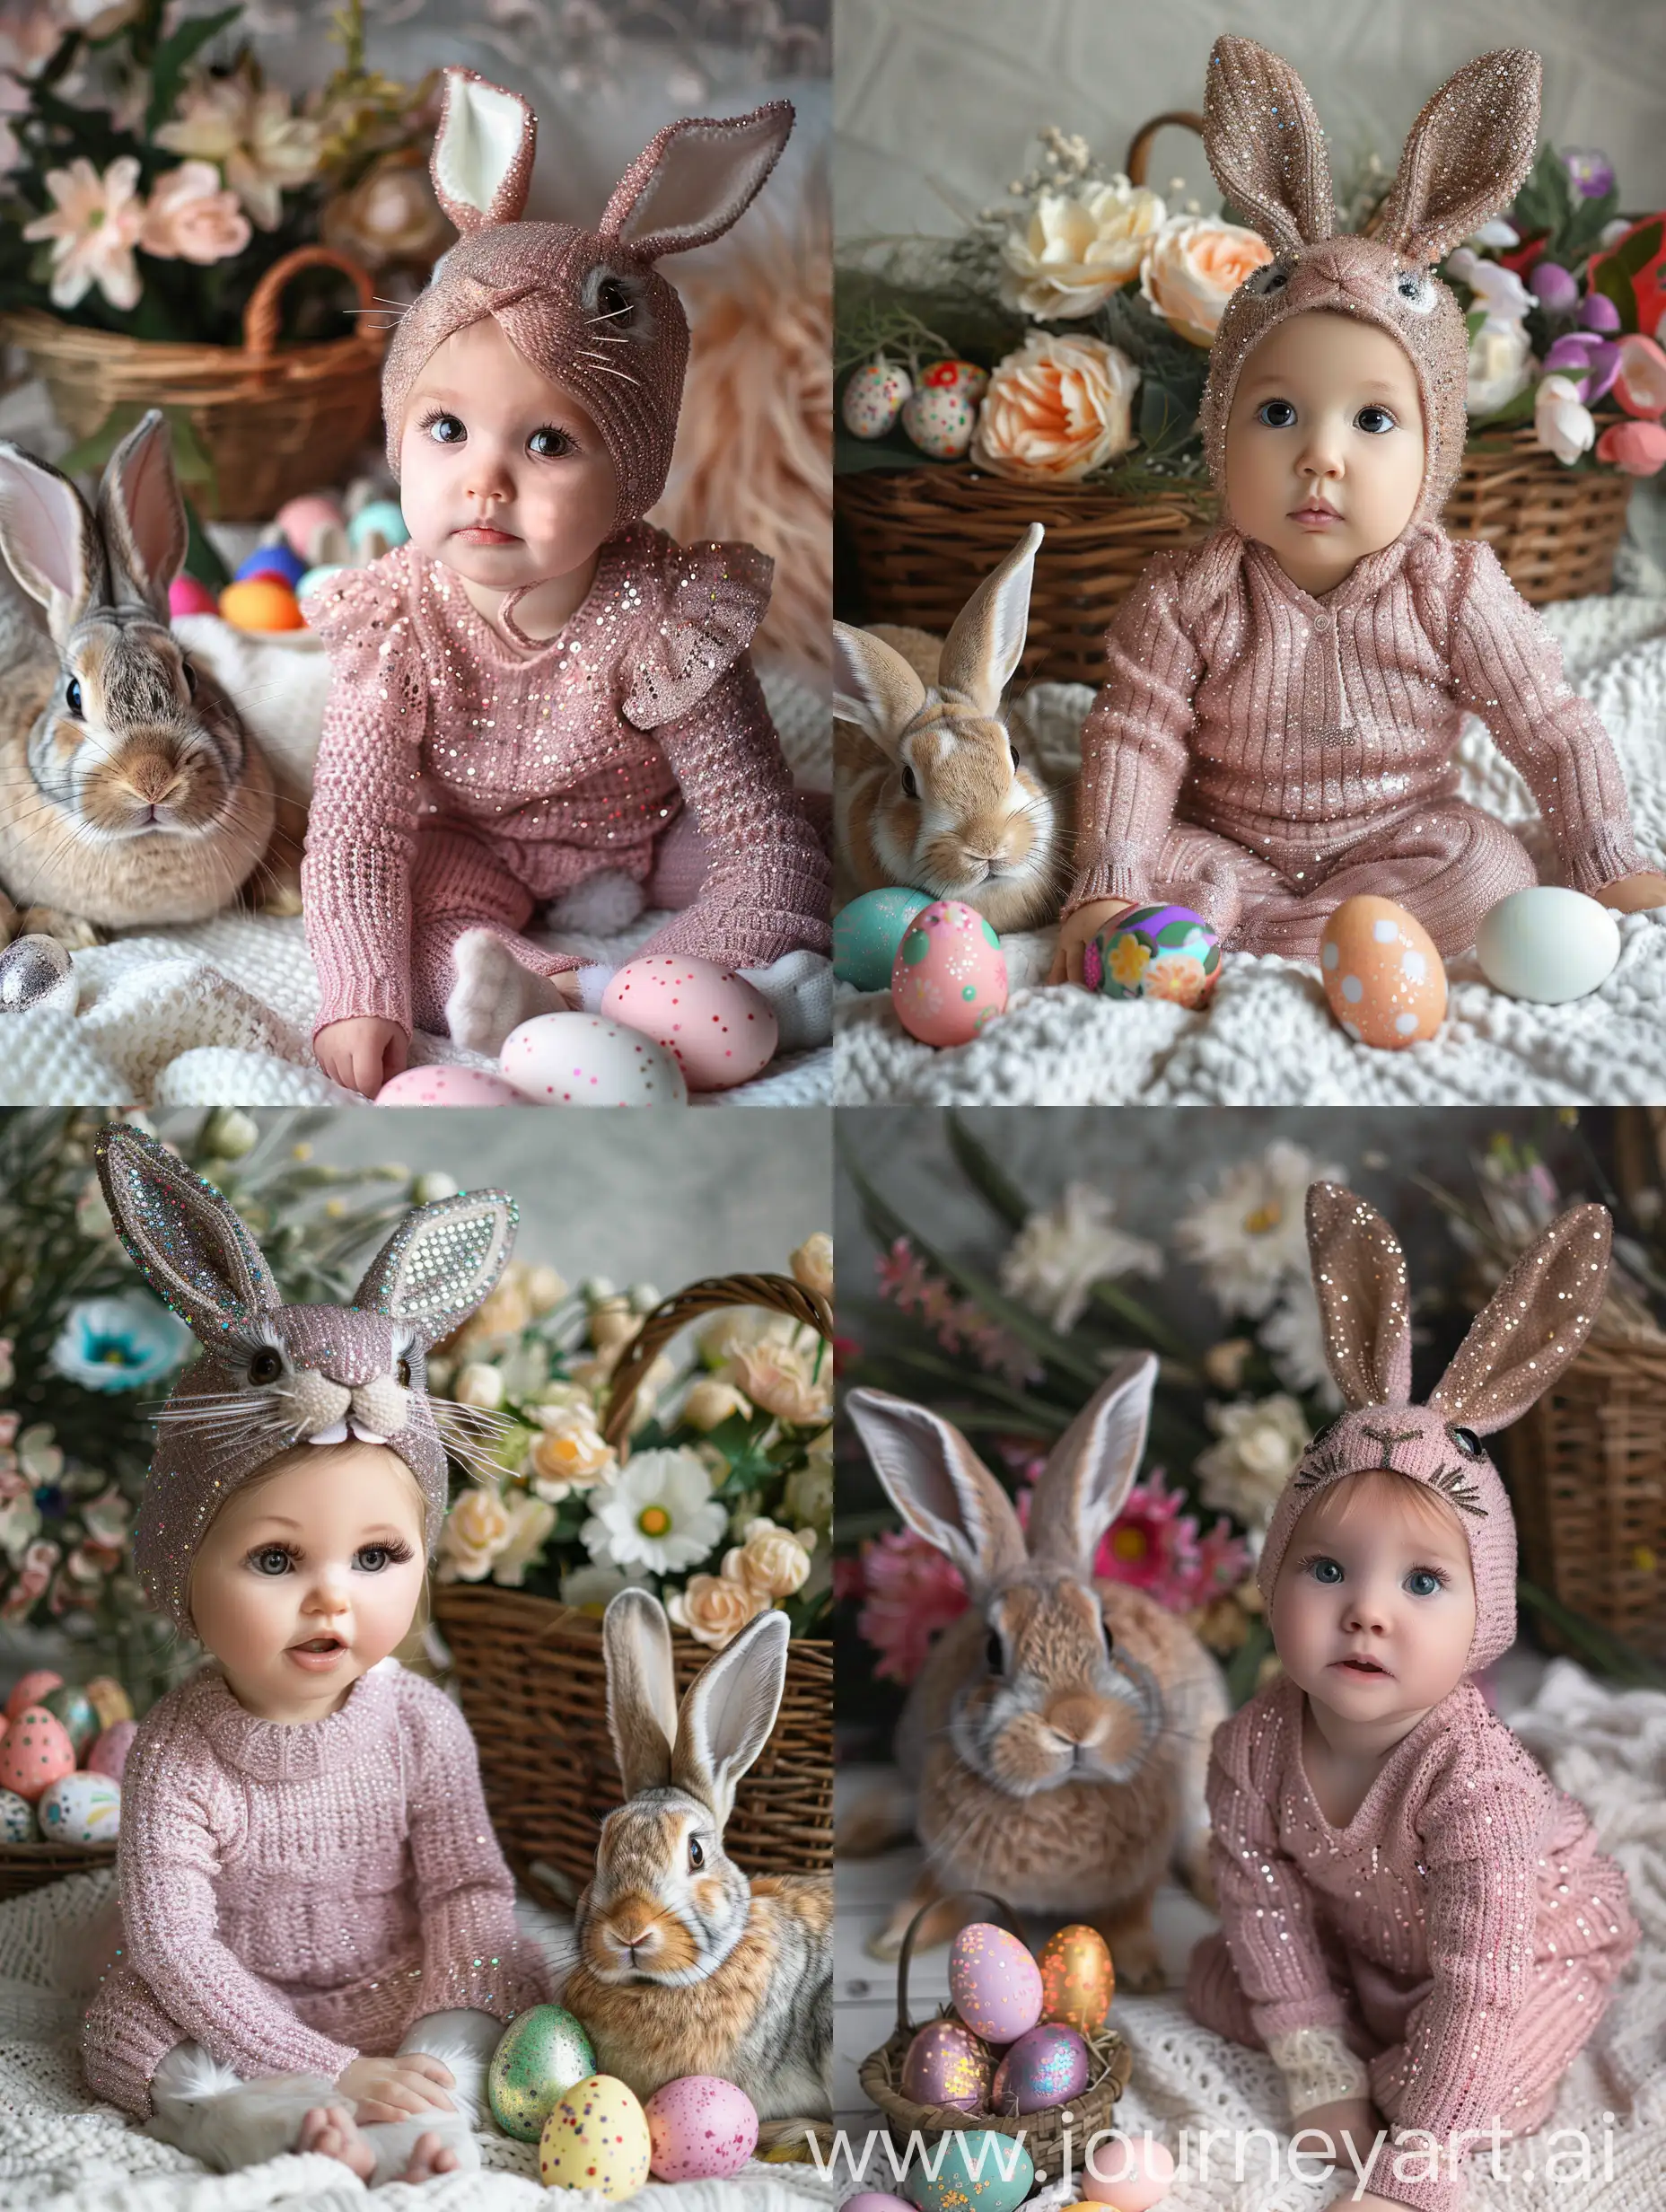 Portrait macrosiemska face A small child in a knitted pink costume with sequins, eyes with big eyelashes, chubby lips in a cap with knitted hare ears forehead open sits on a white blanket, next to sits a live rabbit, the face is clearly visible, macrosbemka looking directly into the camera, next to lie colorful Easter eggs, a basket of flowers, detail, hyperrealism close-up, colors are delicate, aesthetics, daylight , canon photo